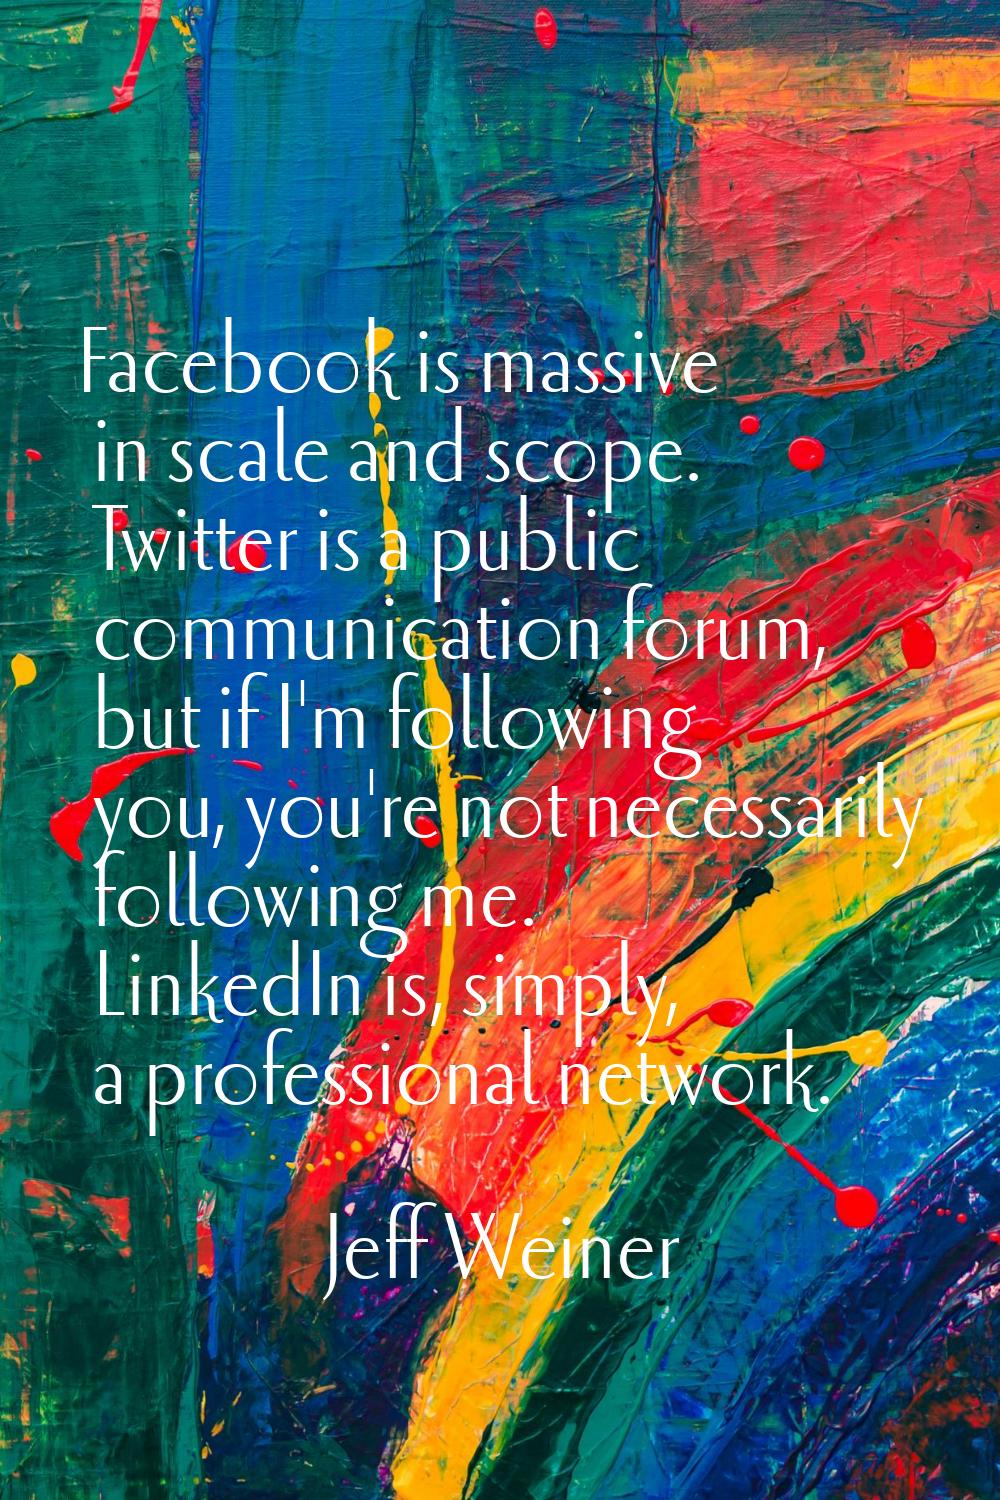 Facebook is massive in scale and scope. Twitter is a public communication forum, but if I'm followi